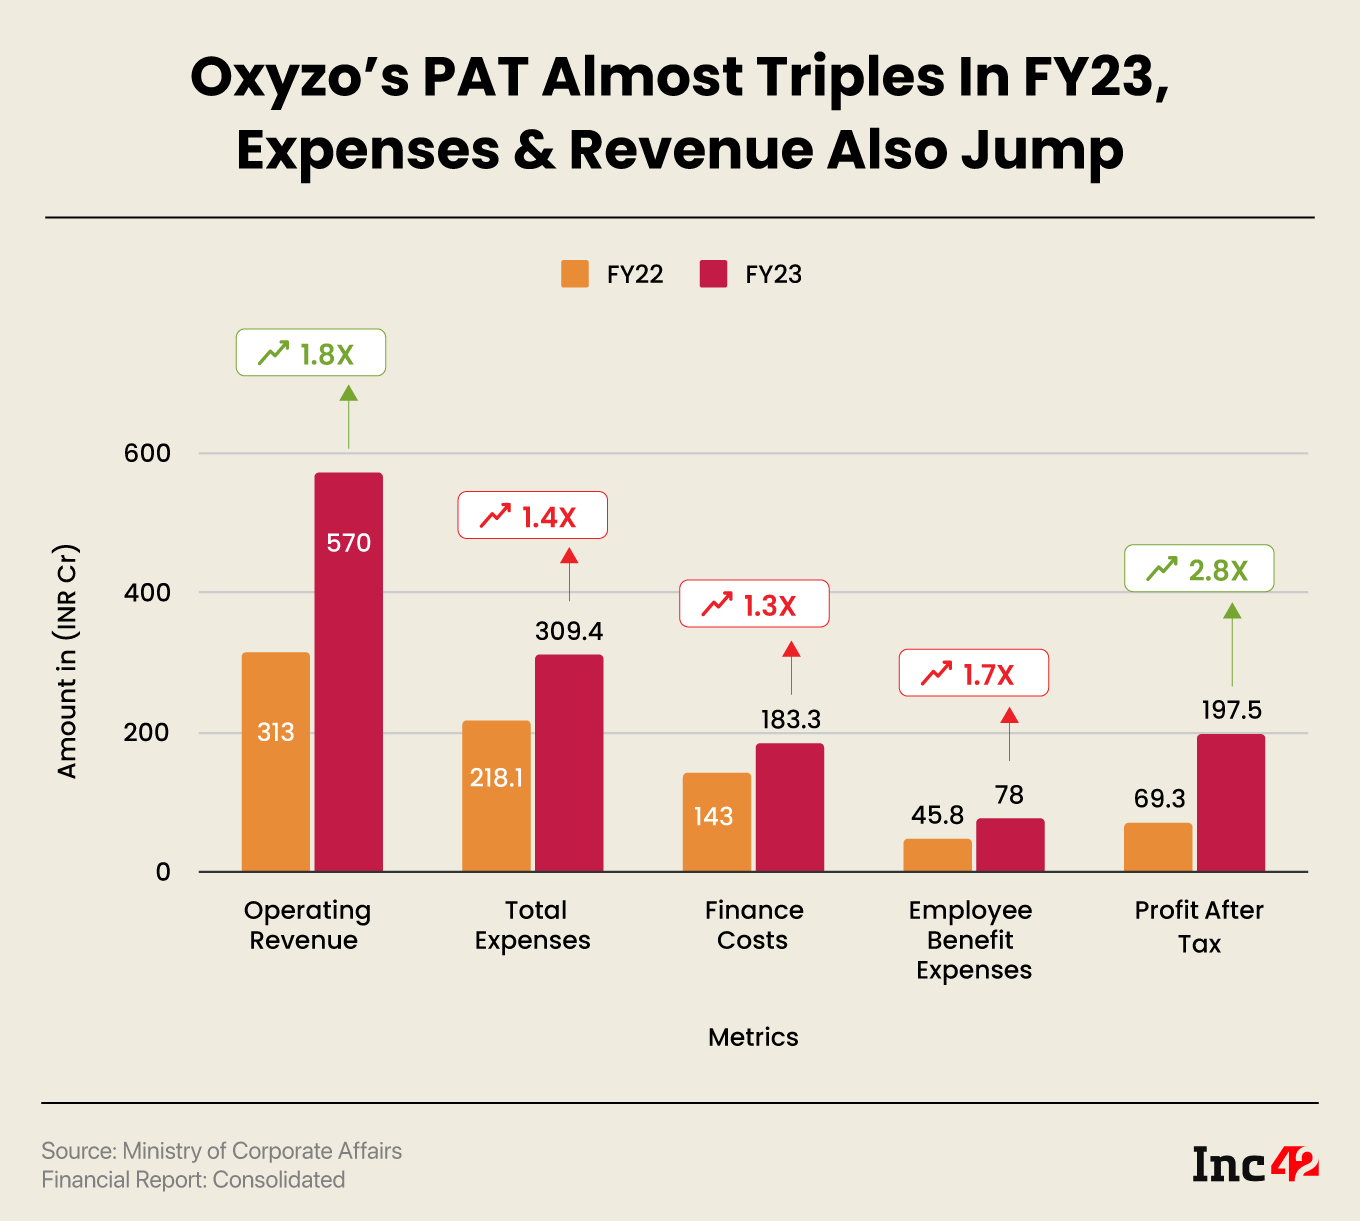 Oxyzo’s PAT Almost Triples In FY23, Expenses & Revenue Also Jump